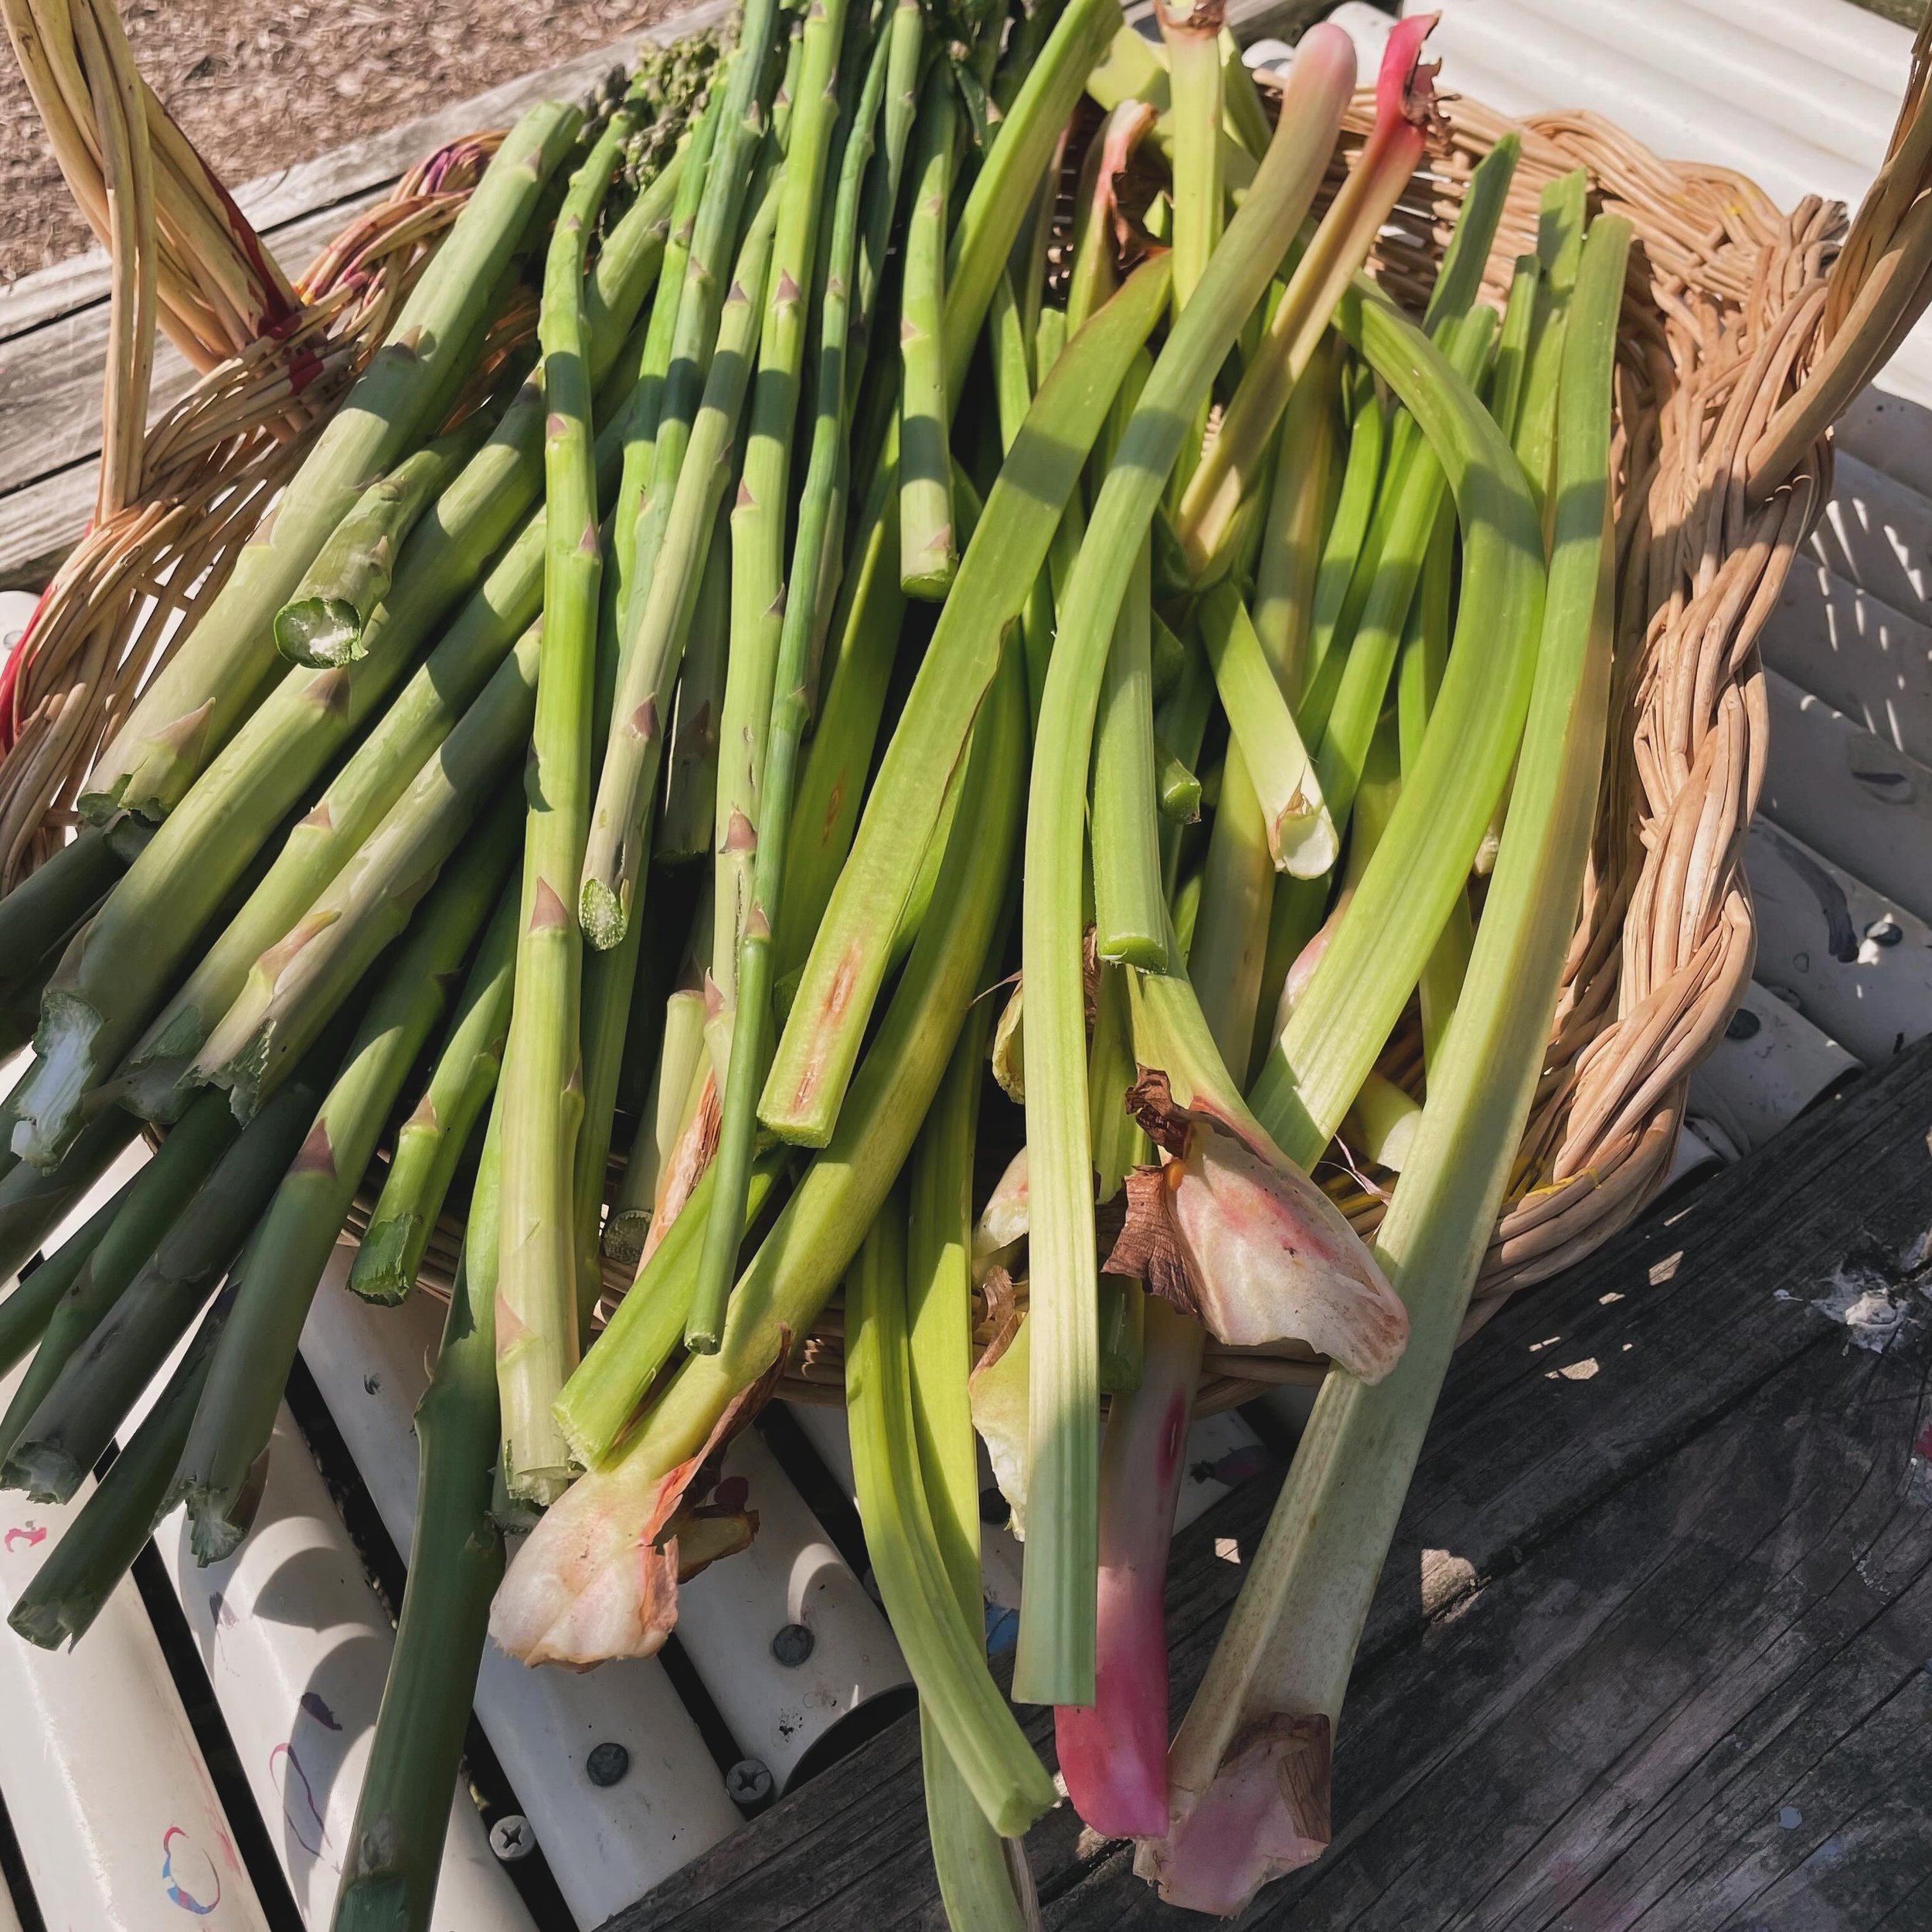 Prepping for our first Community Dinner Weds night May 1st at 5 pm. Asparagus and rhubarb from the Garden will be on the menu! 

Hilltoppers, please join us every first Weds throughout the season for a healthful dinner and community conversation.